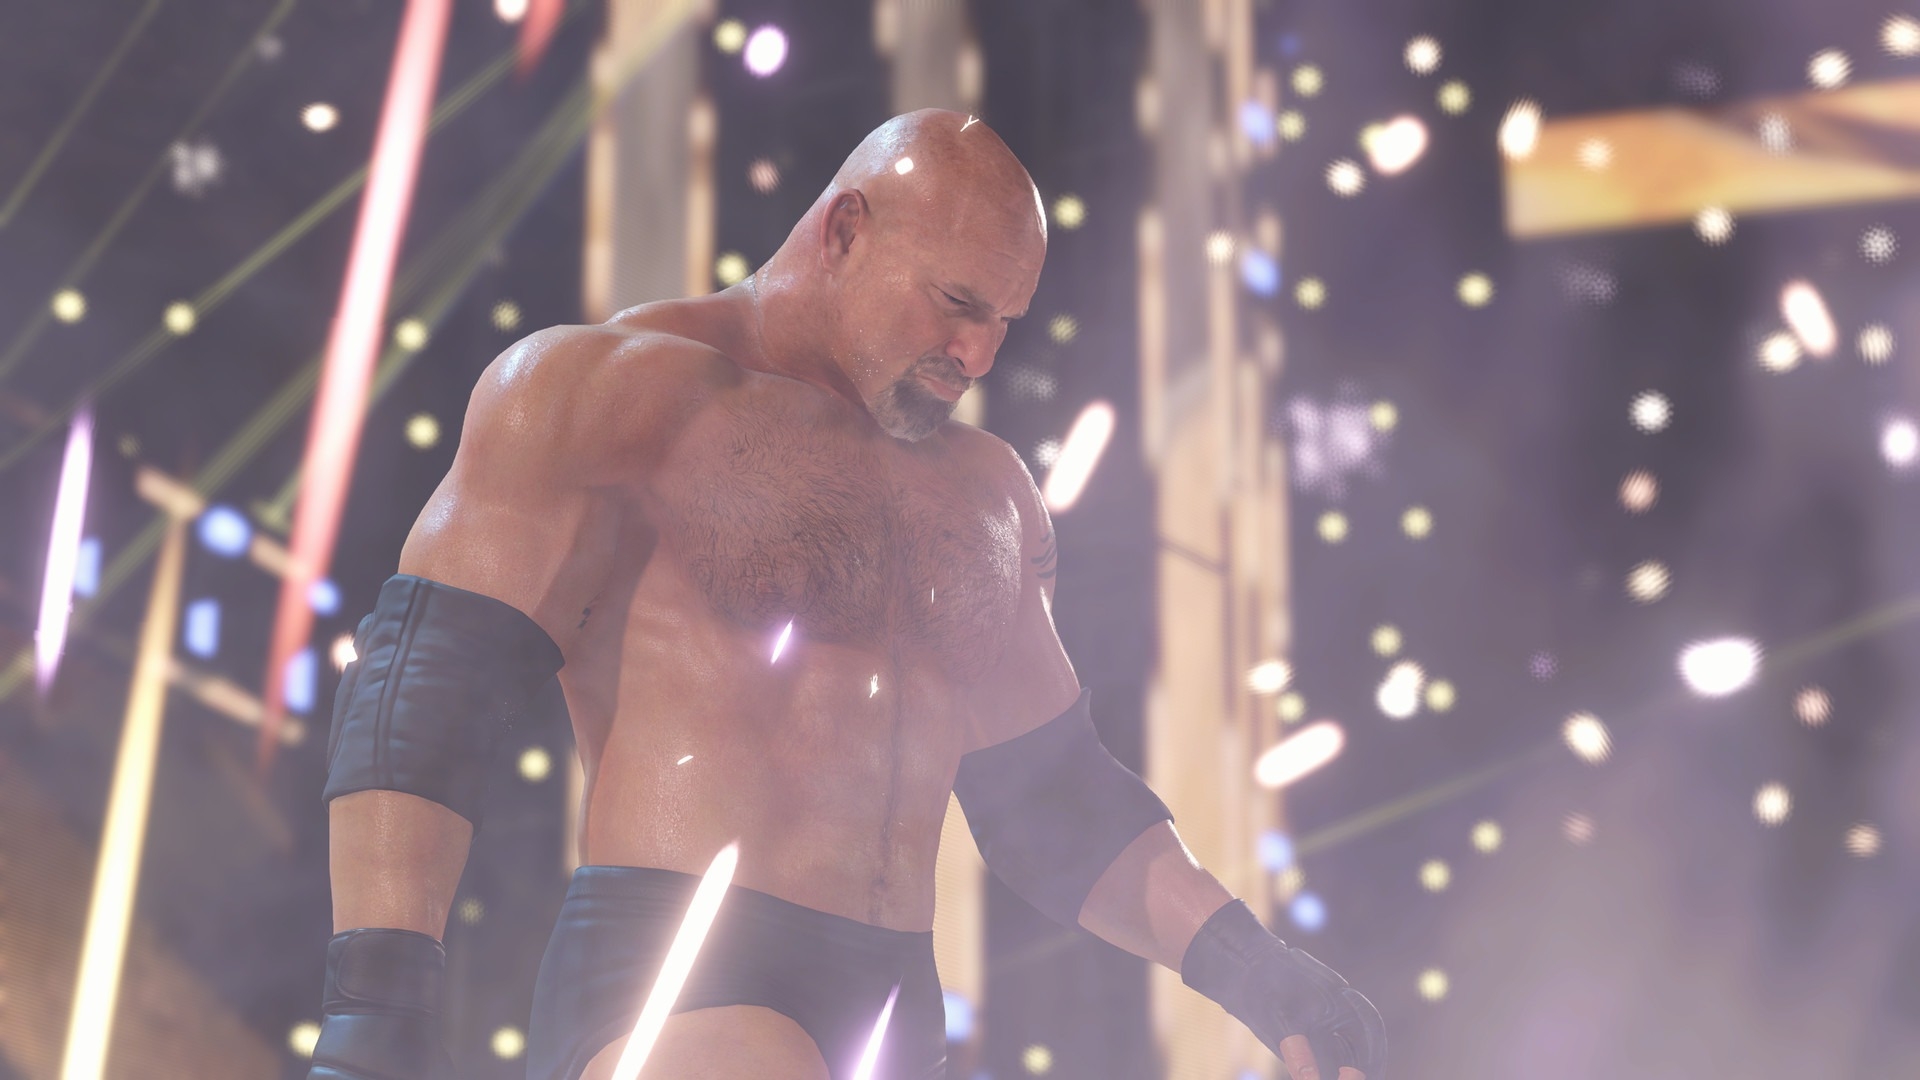 Today we are going to cover the latest WWE 2K22 update 1.12 patch notes, so you know what has changed in the popular wrestling game.